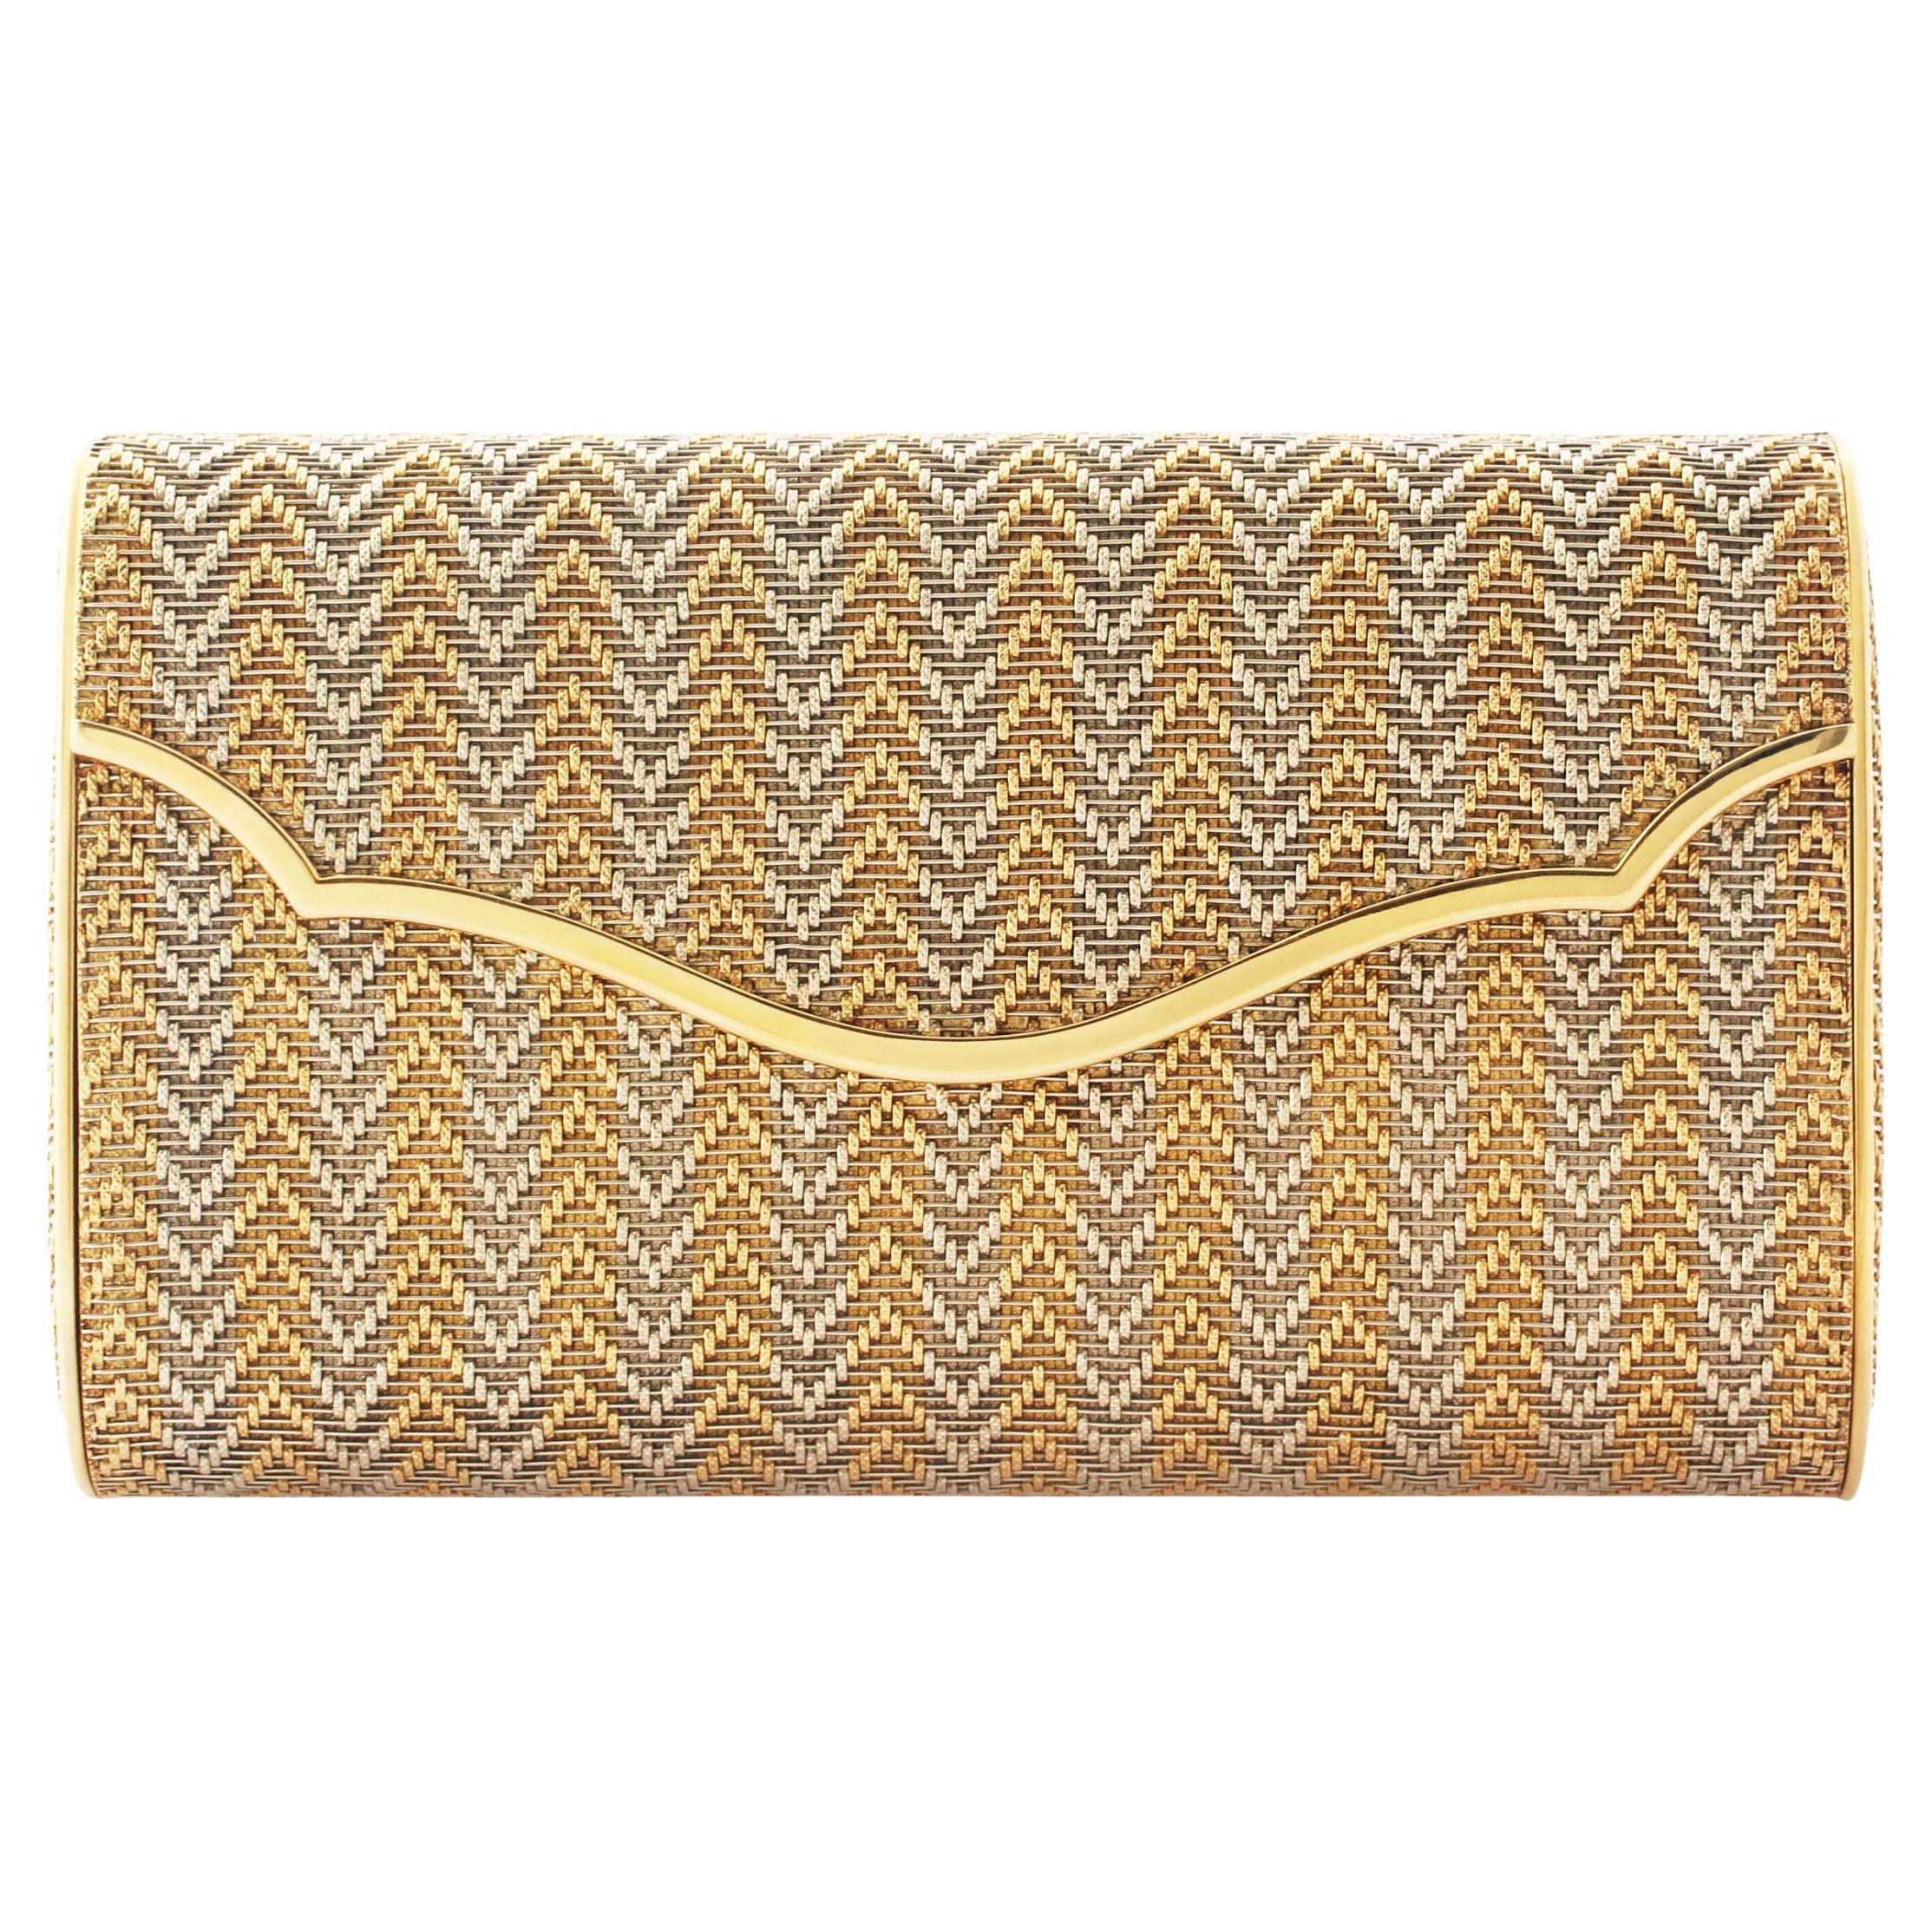 Two Tone Gold Evening Bag by Patek Philippe